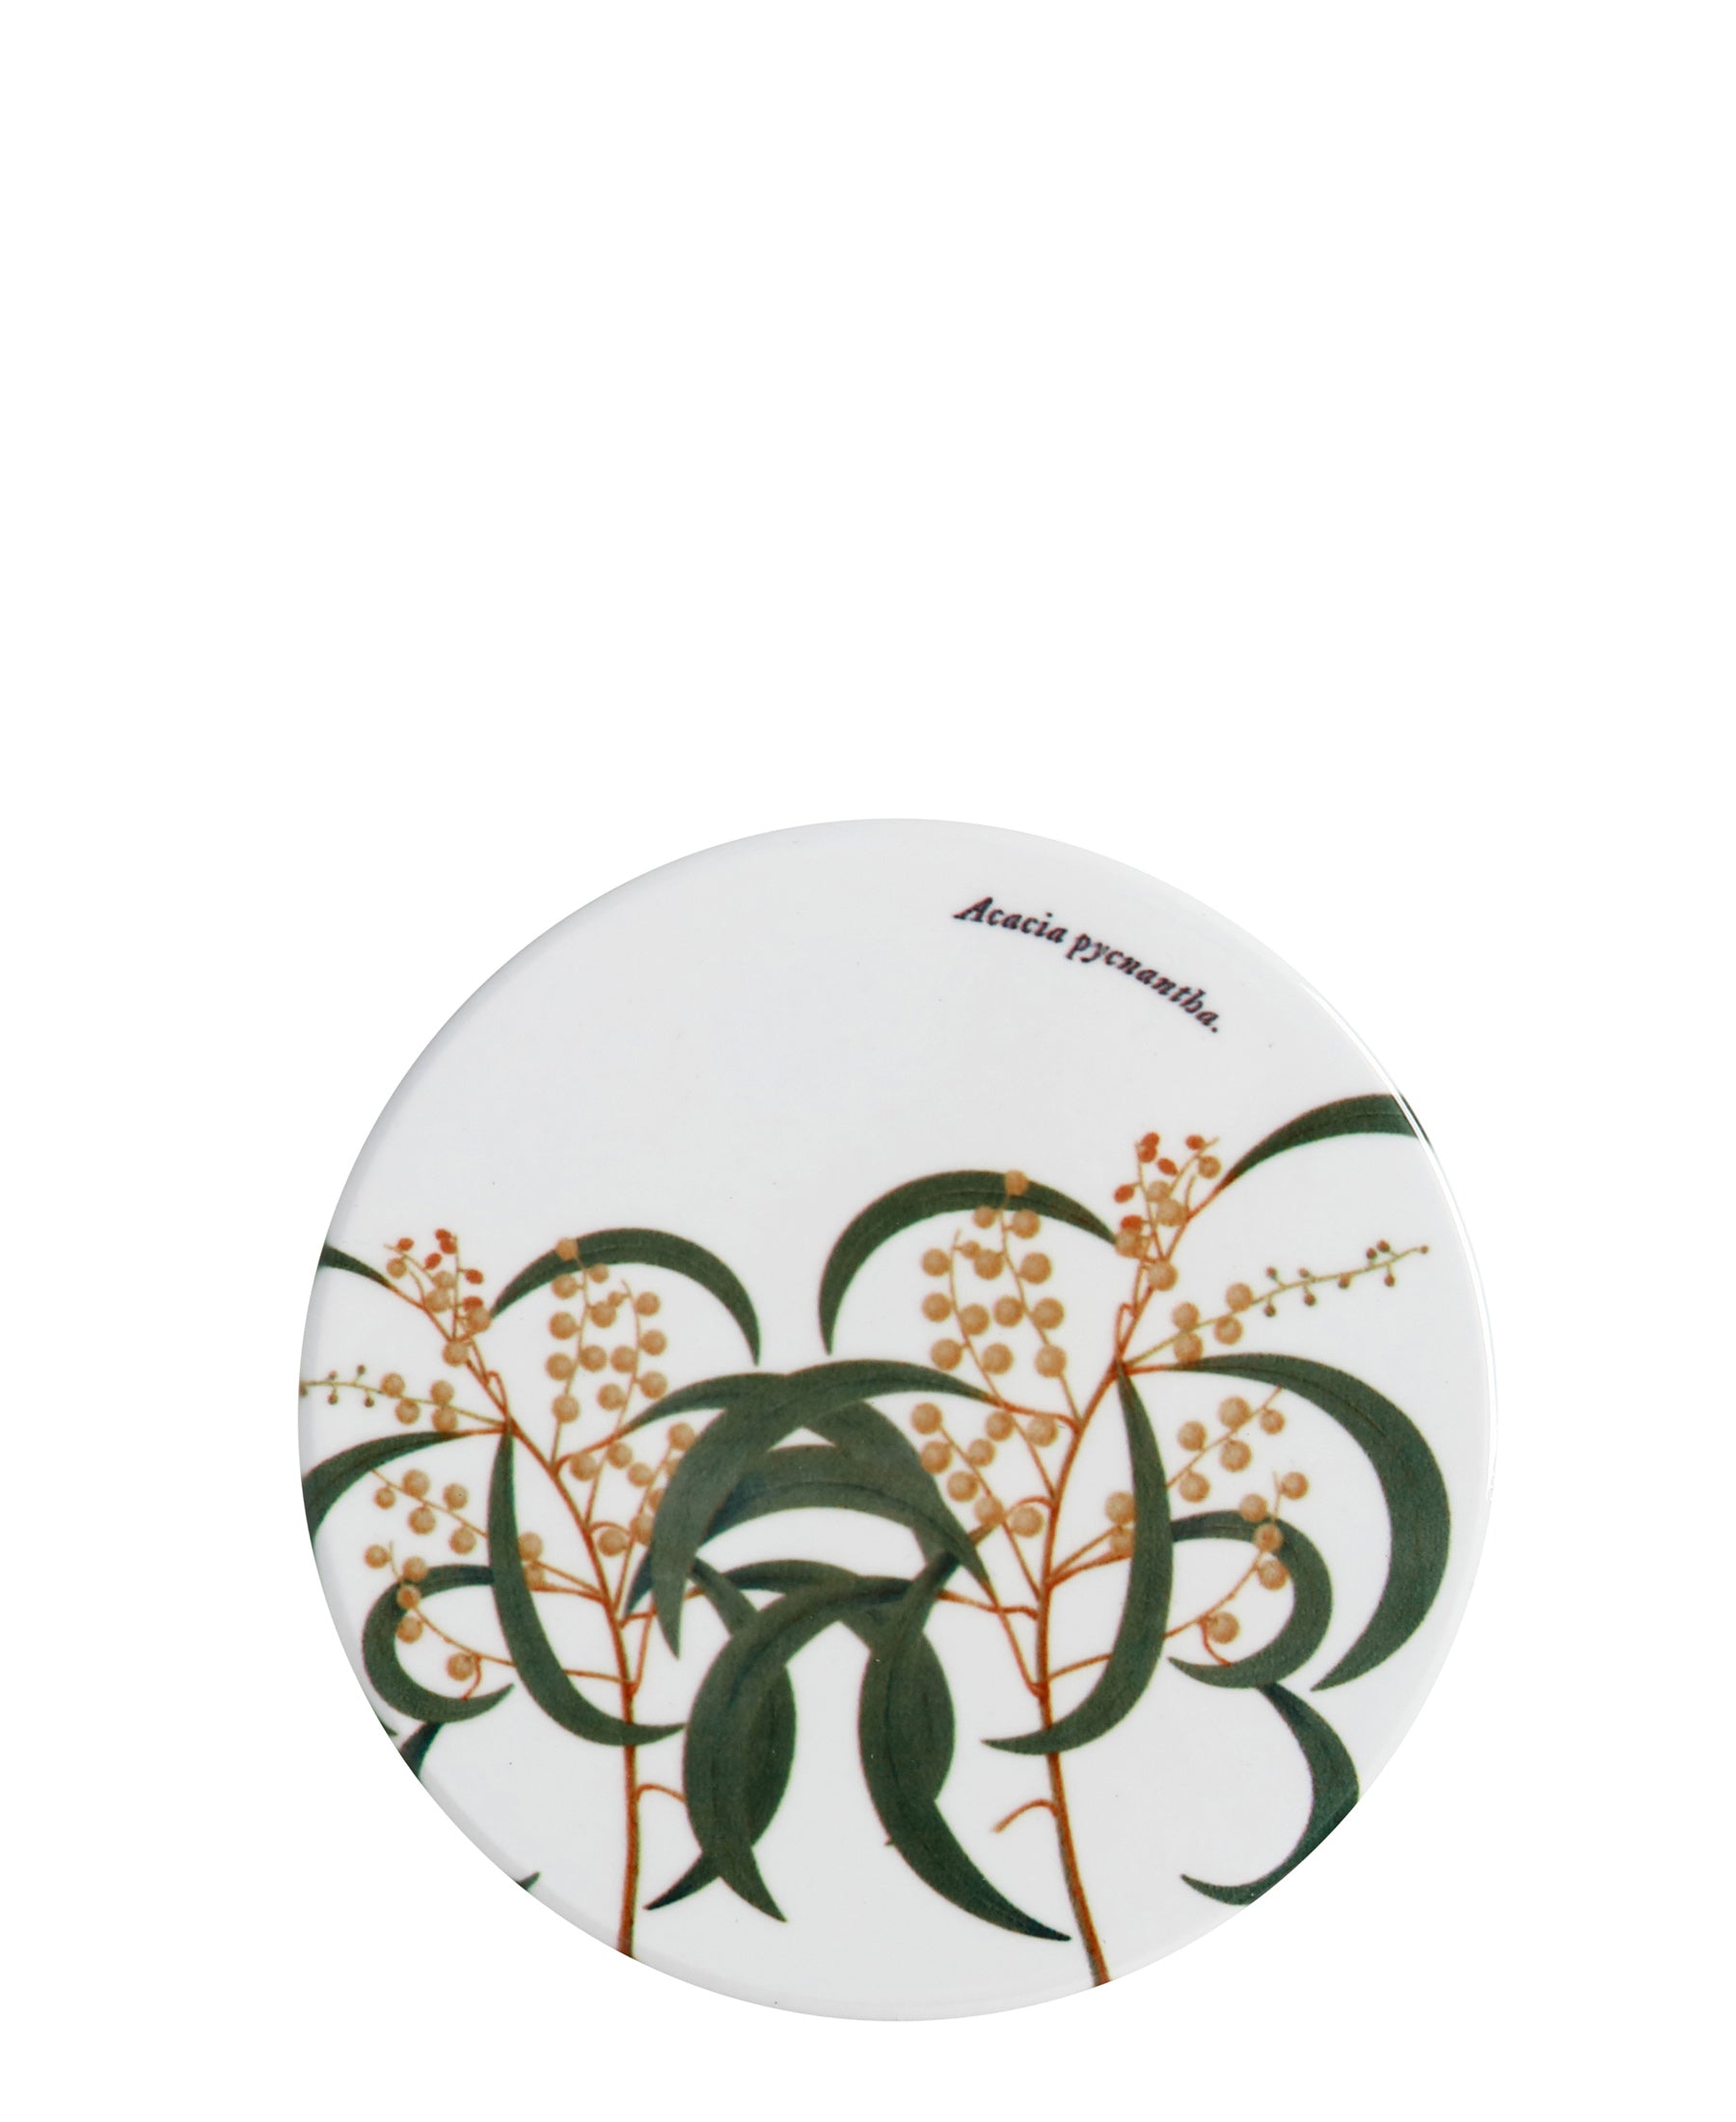 Maxwell & Williams Botanic 9,5cm Round Coaster - White With Green Floral Print